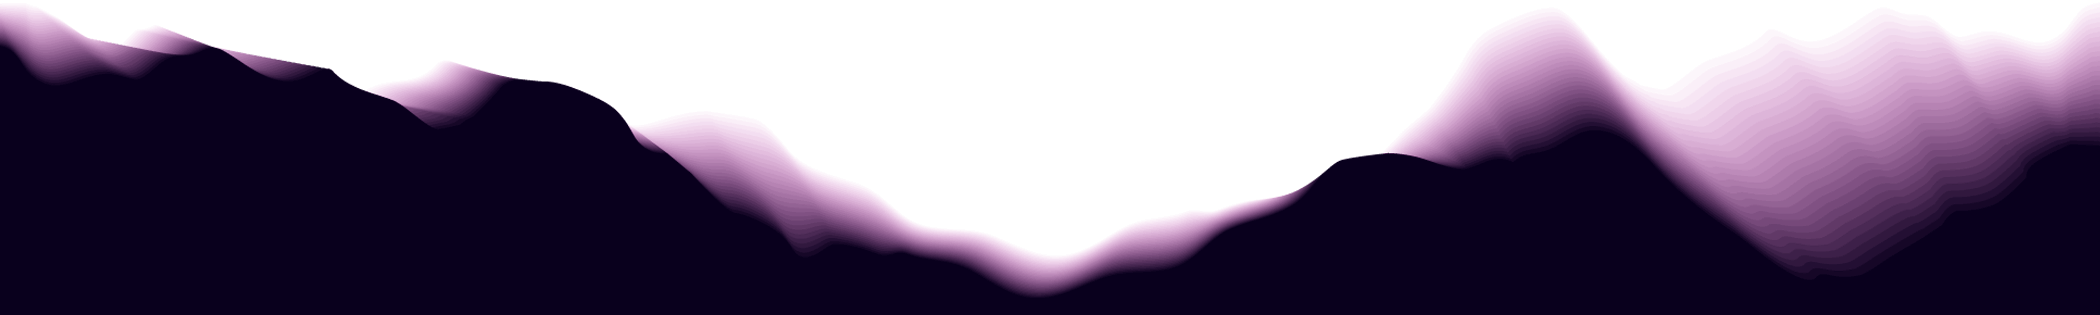 http://www.marabout-adel.fr/wp-content/uploads/2018/05/purple_top_divider.png